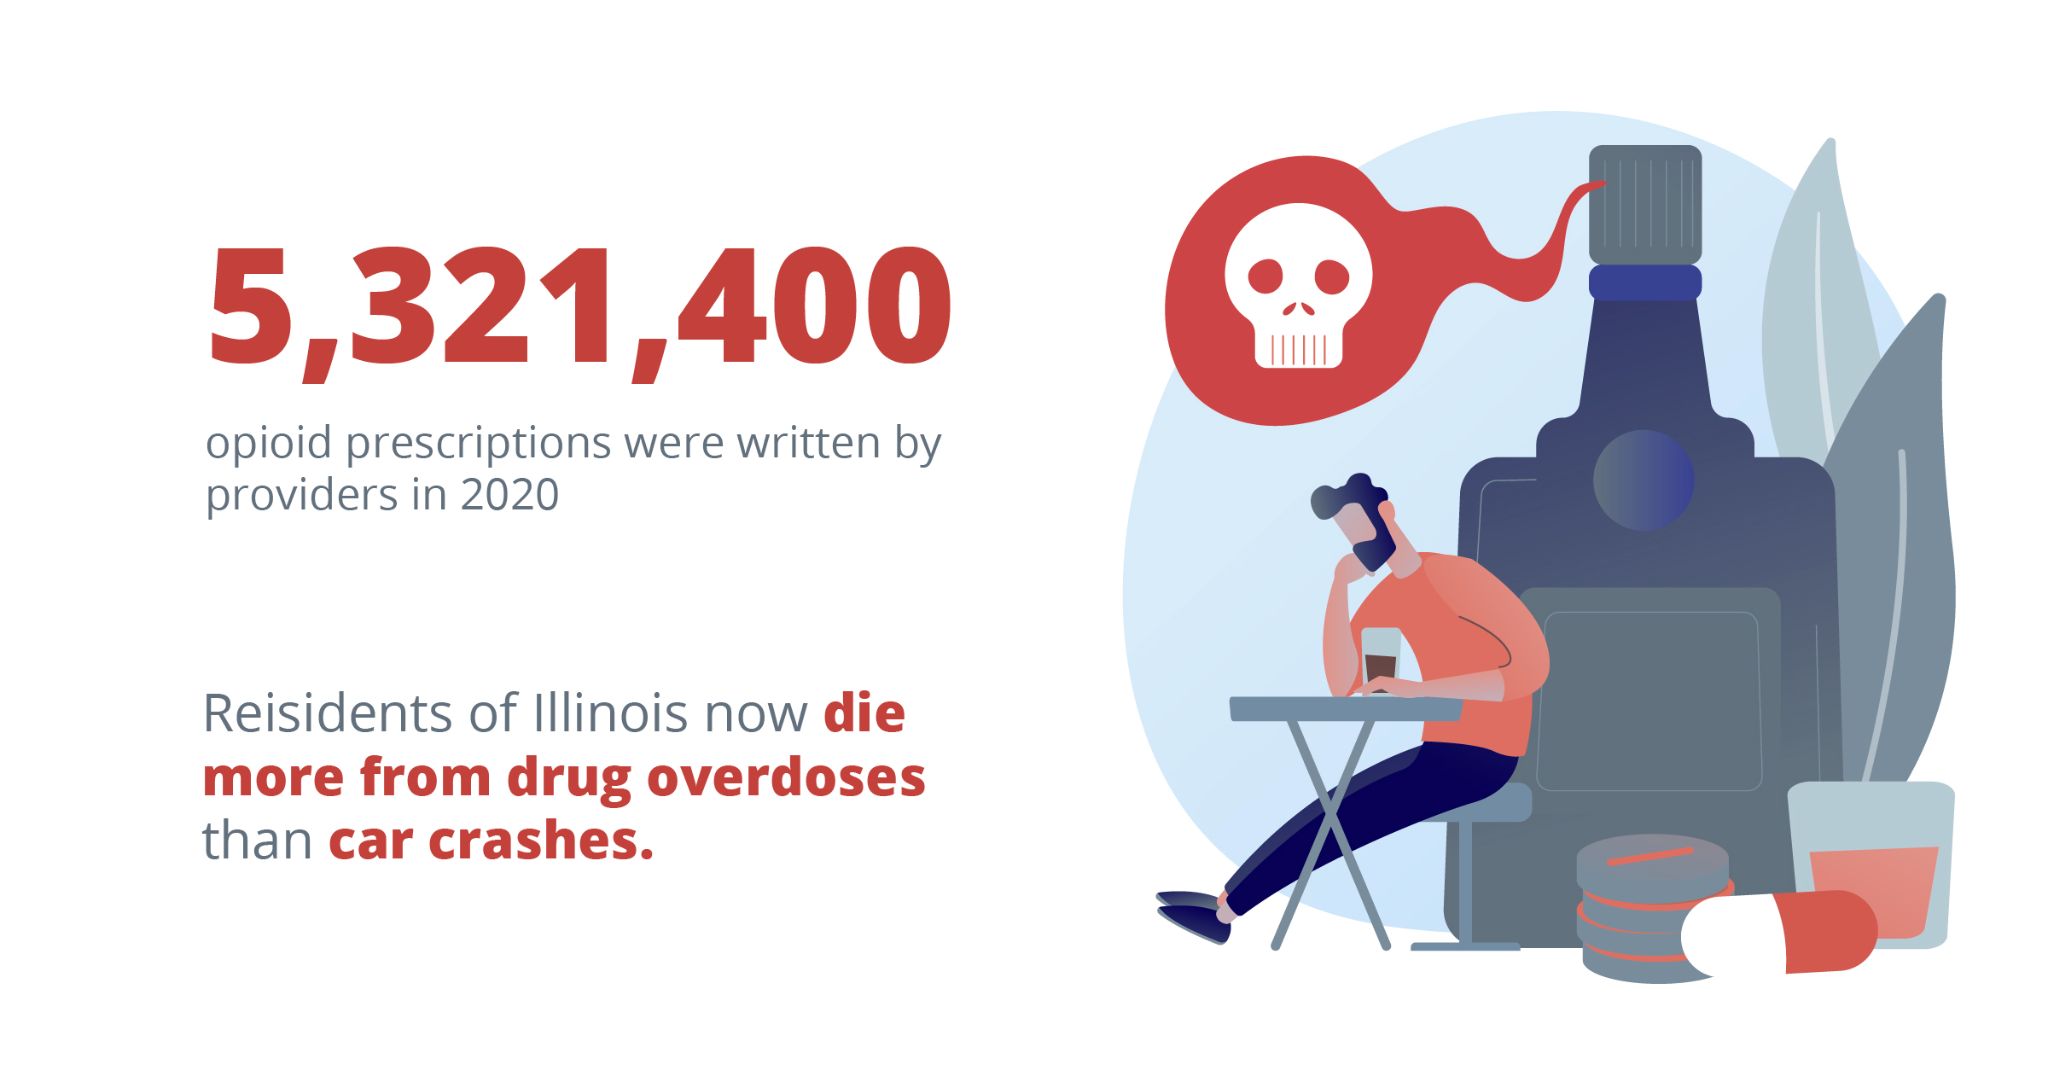 5,321,400 opioid prescriptions were written by providers in 2020. Residents of illinois now die more from drug overdoses than car crashes. Drug And Alcohol Detox & Rehab, Addiction Treatment Resources in Bloomington Illinois